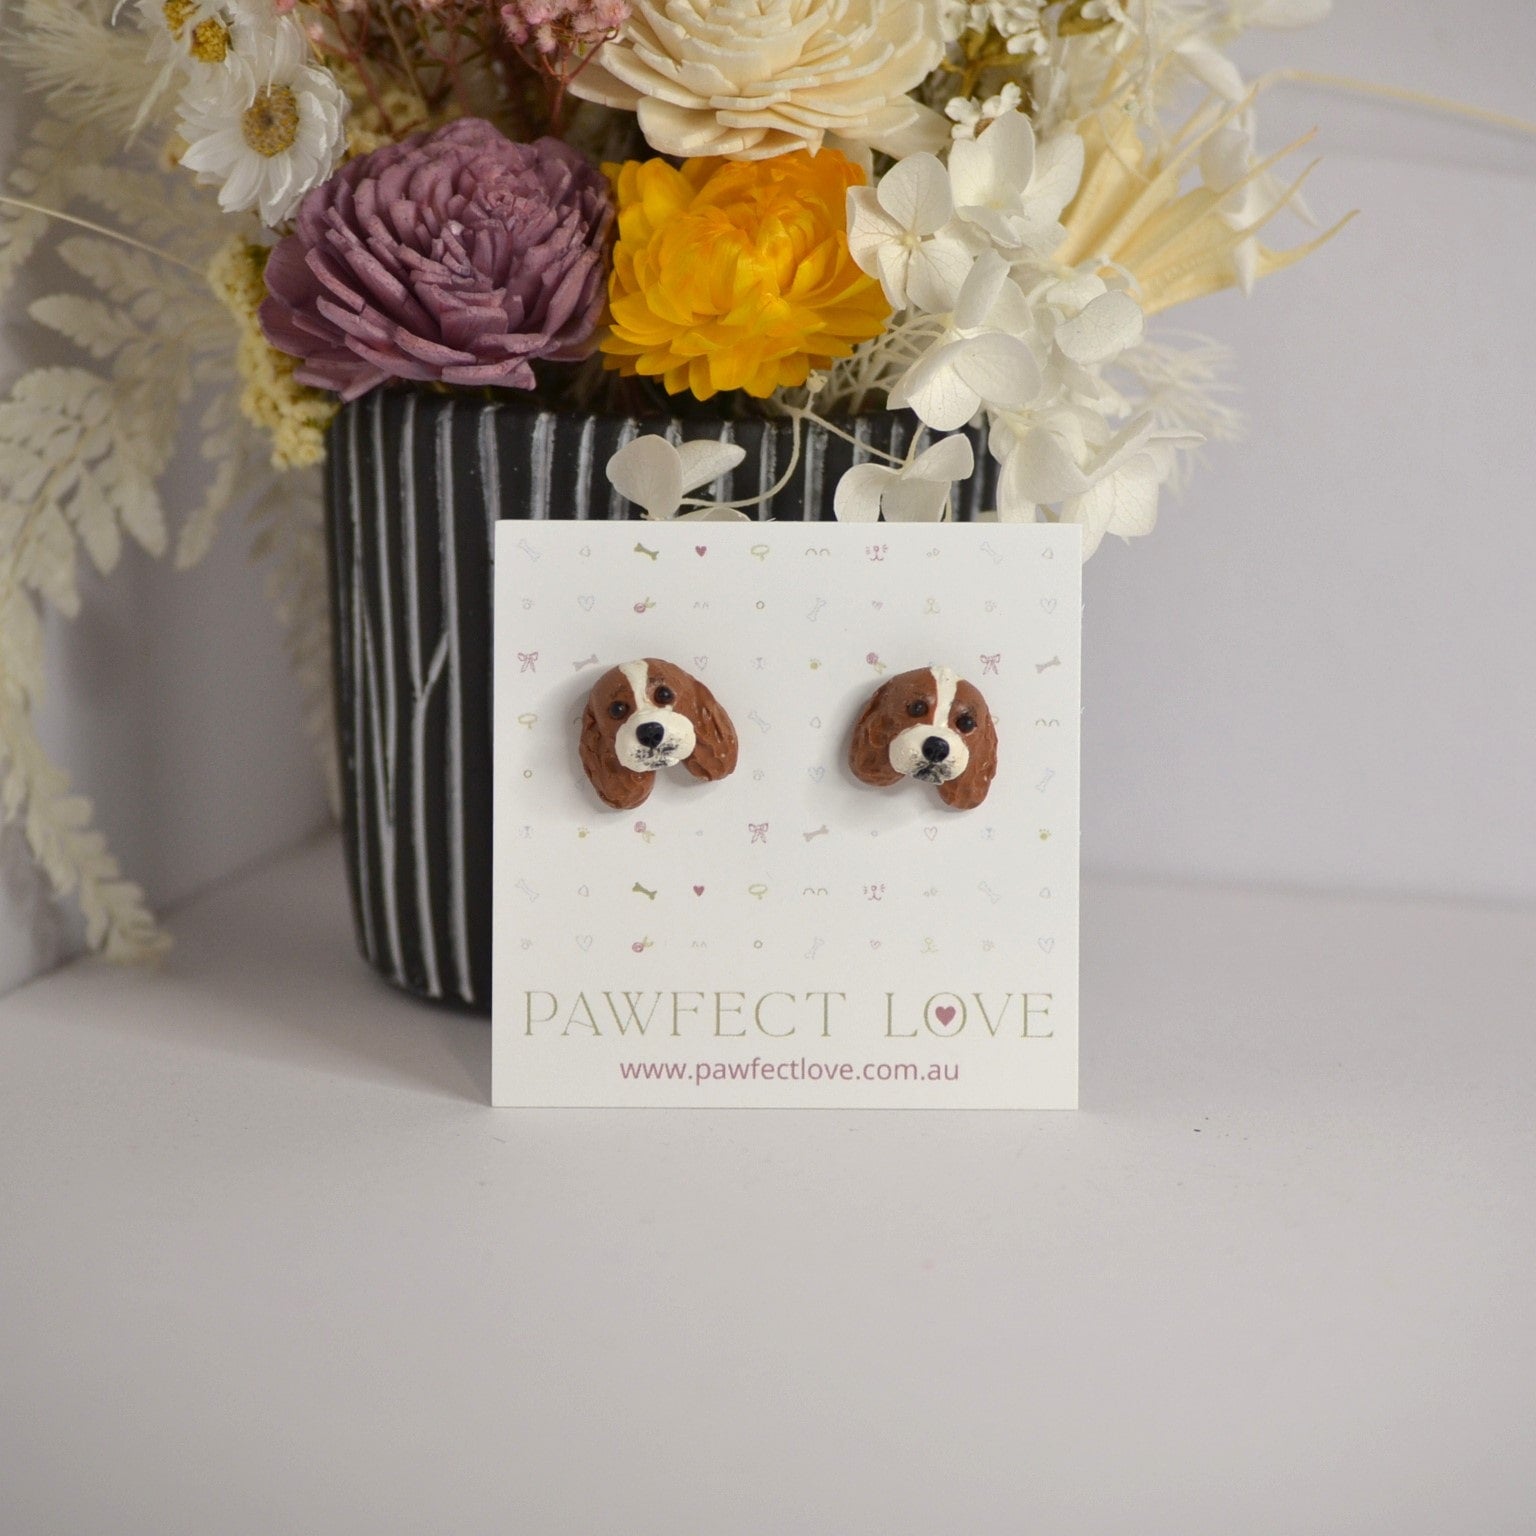 Handmade cavalier king charles spaniel stud earrings by Pawfect Love, positioned in front of dried flower arrangement